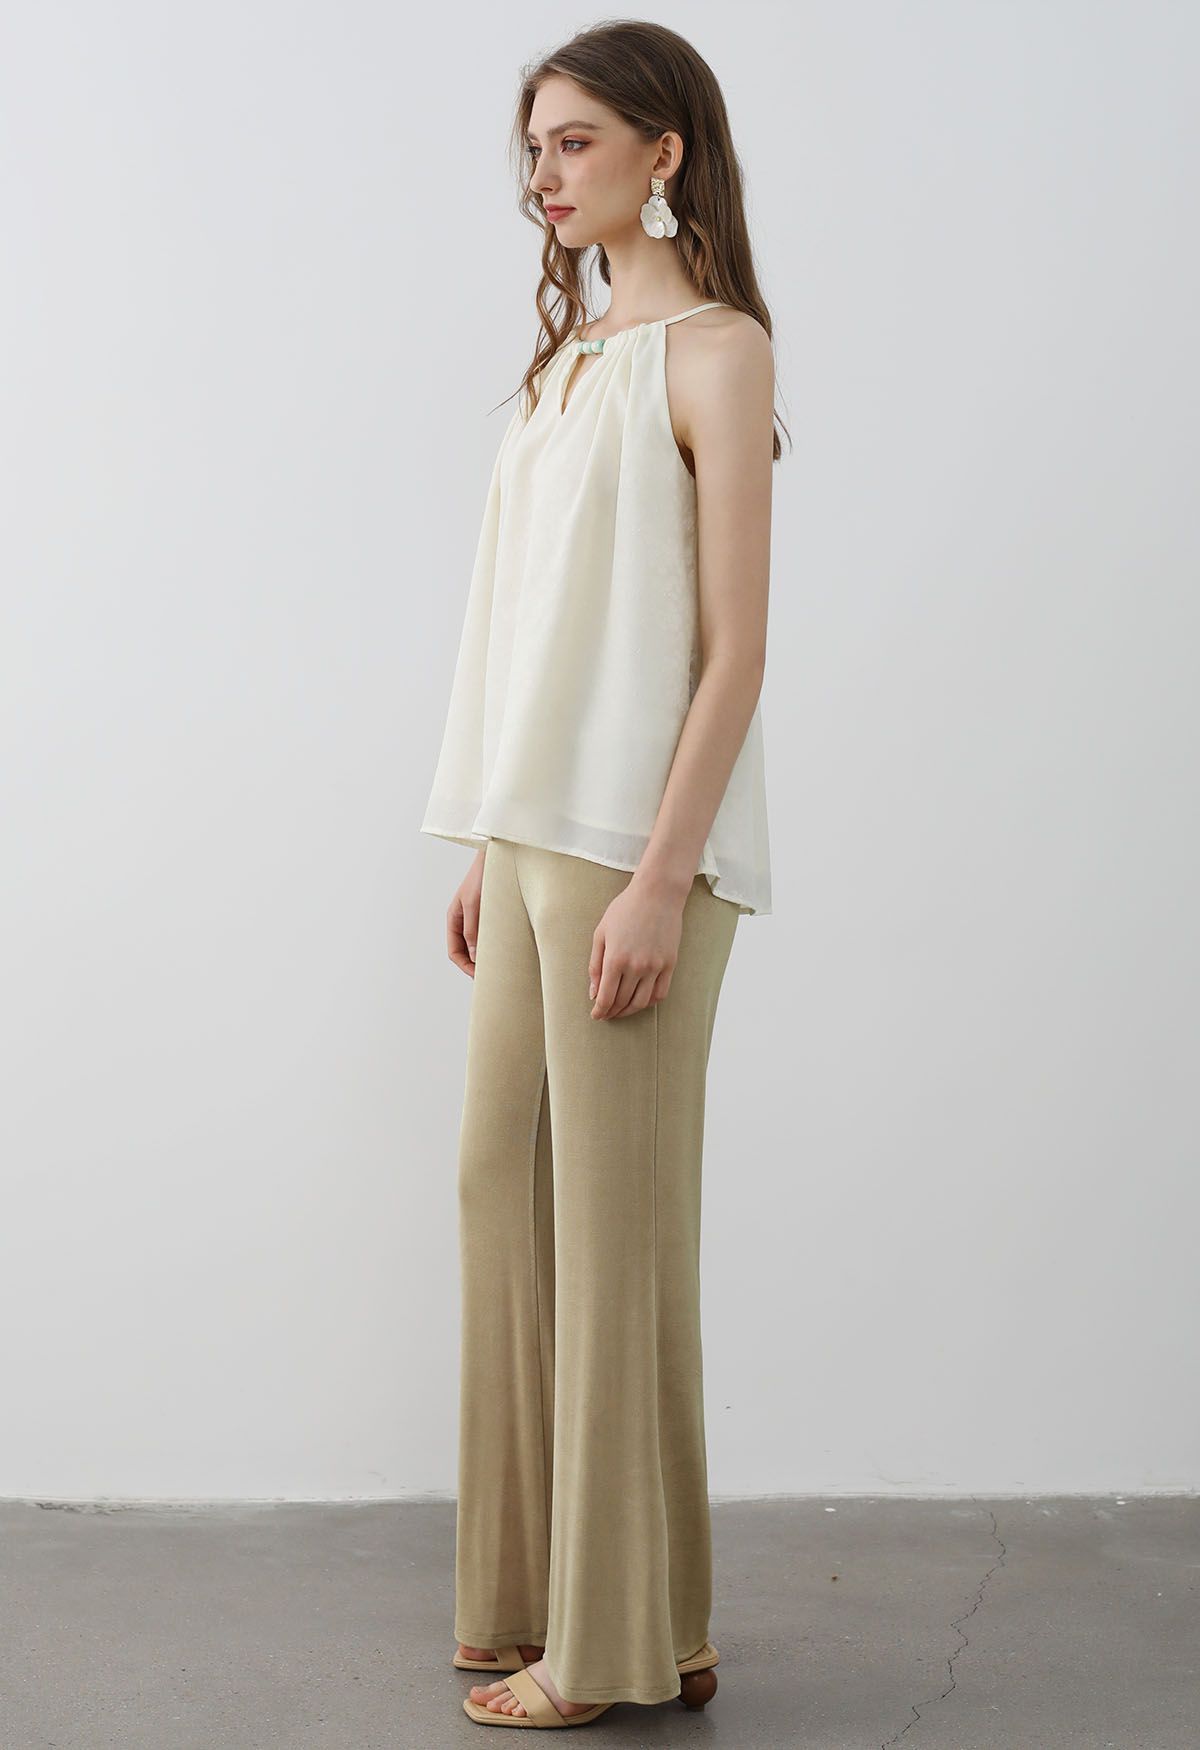 Relaxed Fit Flare Hem Pants in Sand